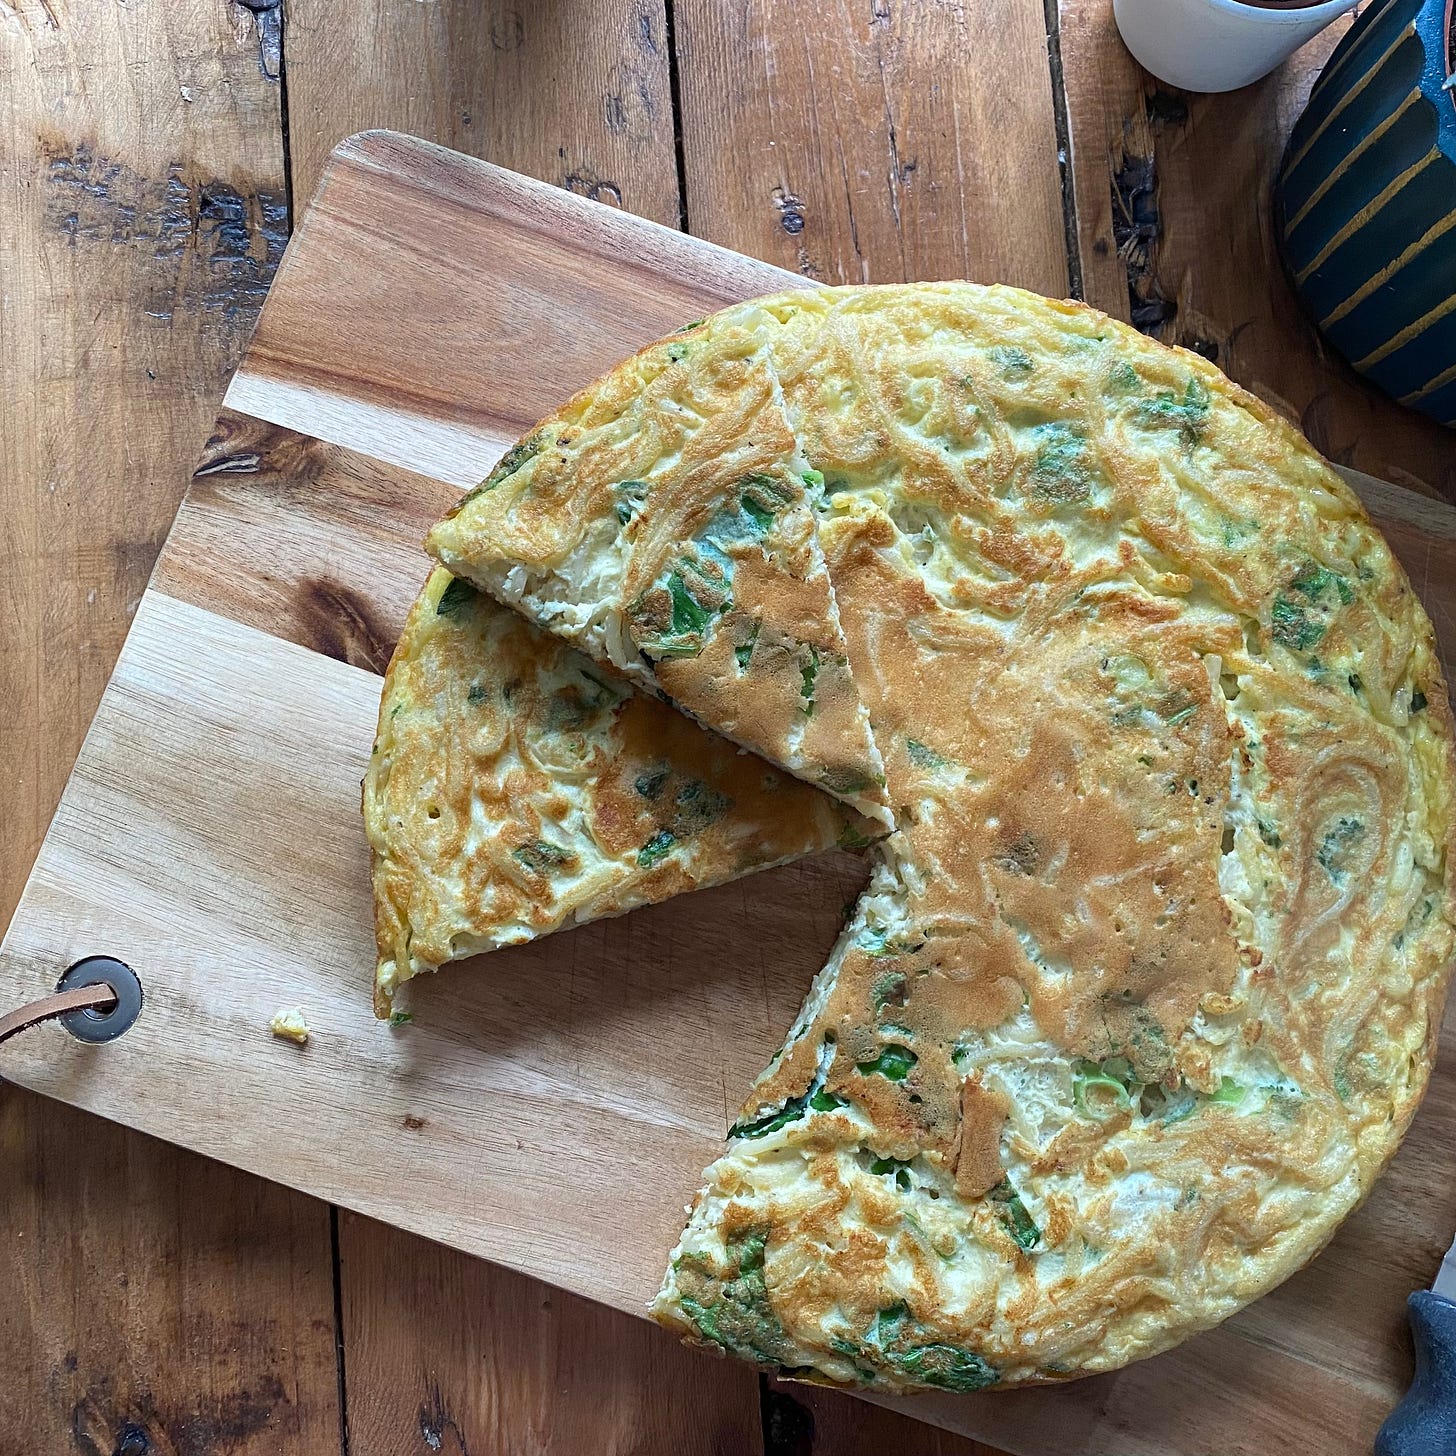 Round omelette served on a wooden board with a small wedge cut out. The frittata is made of cooked spaghetti, chard, onions, egg and cheese